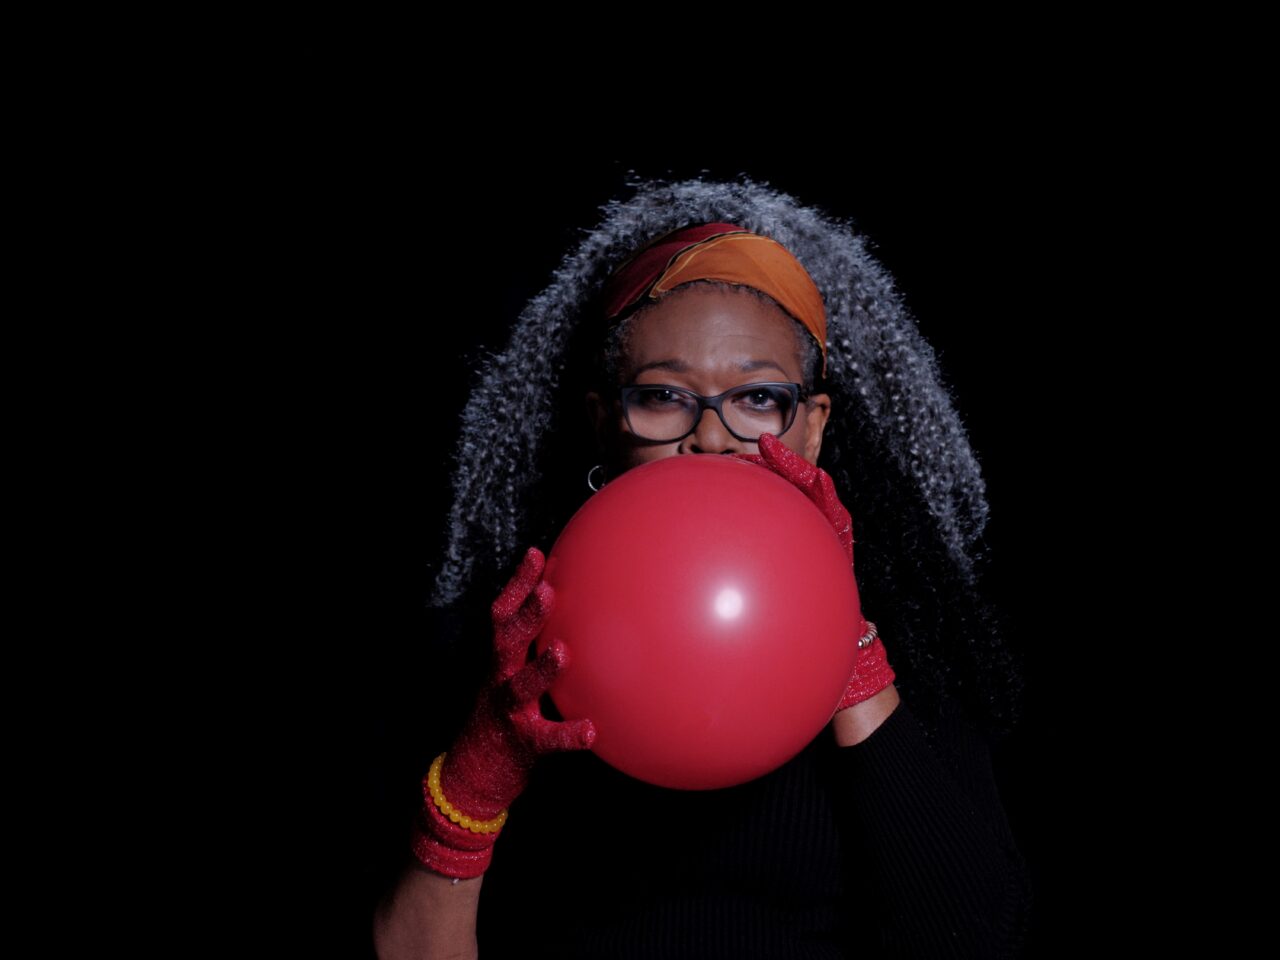 A video still of someone blowing up a red balloon, the balloon is in front of their face, the space behind them is black.